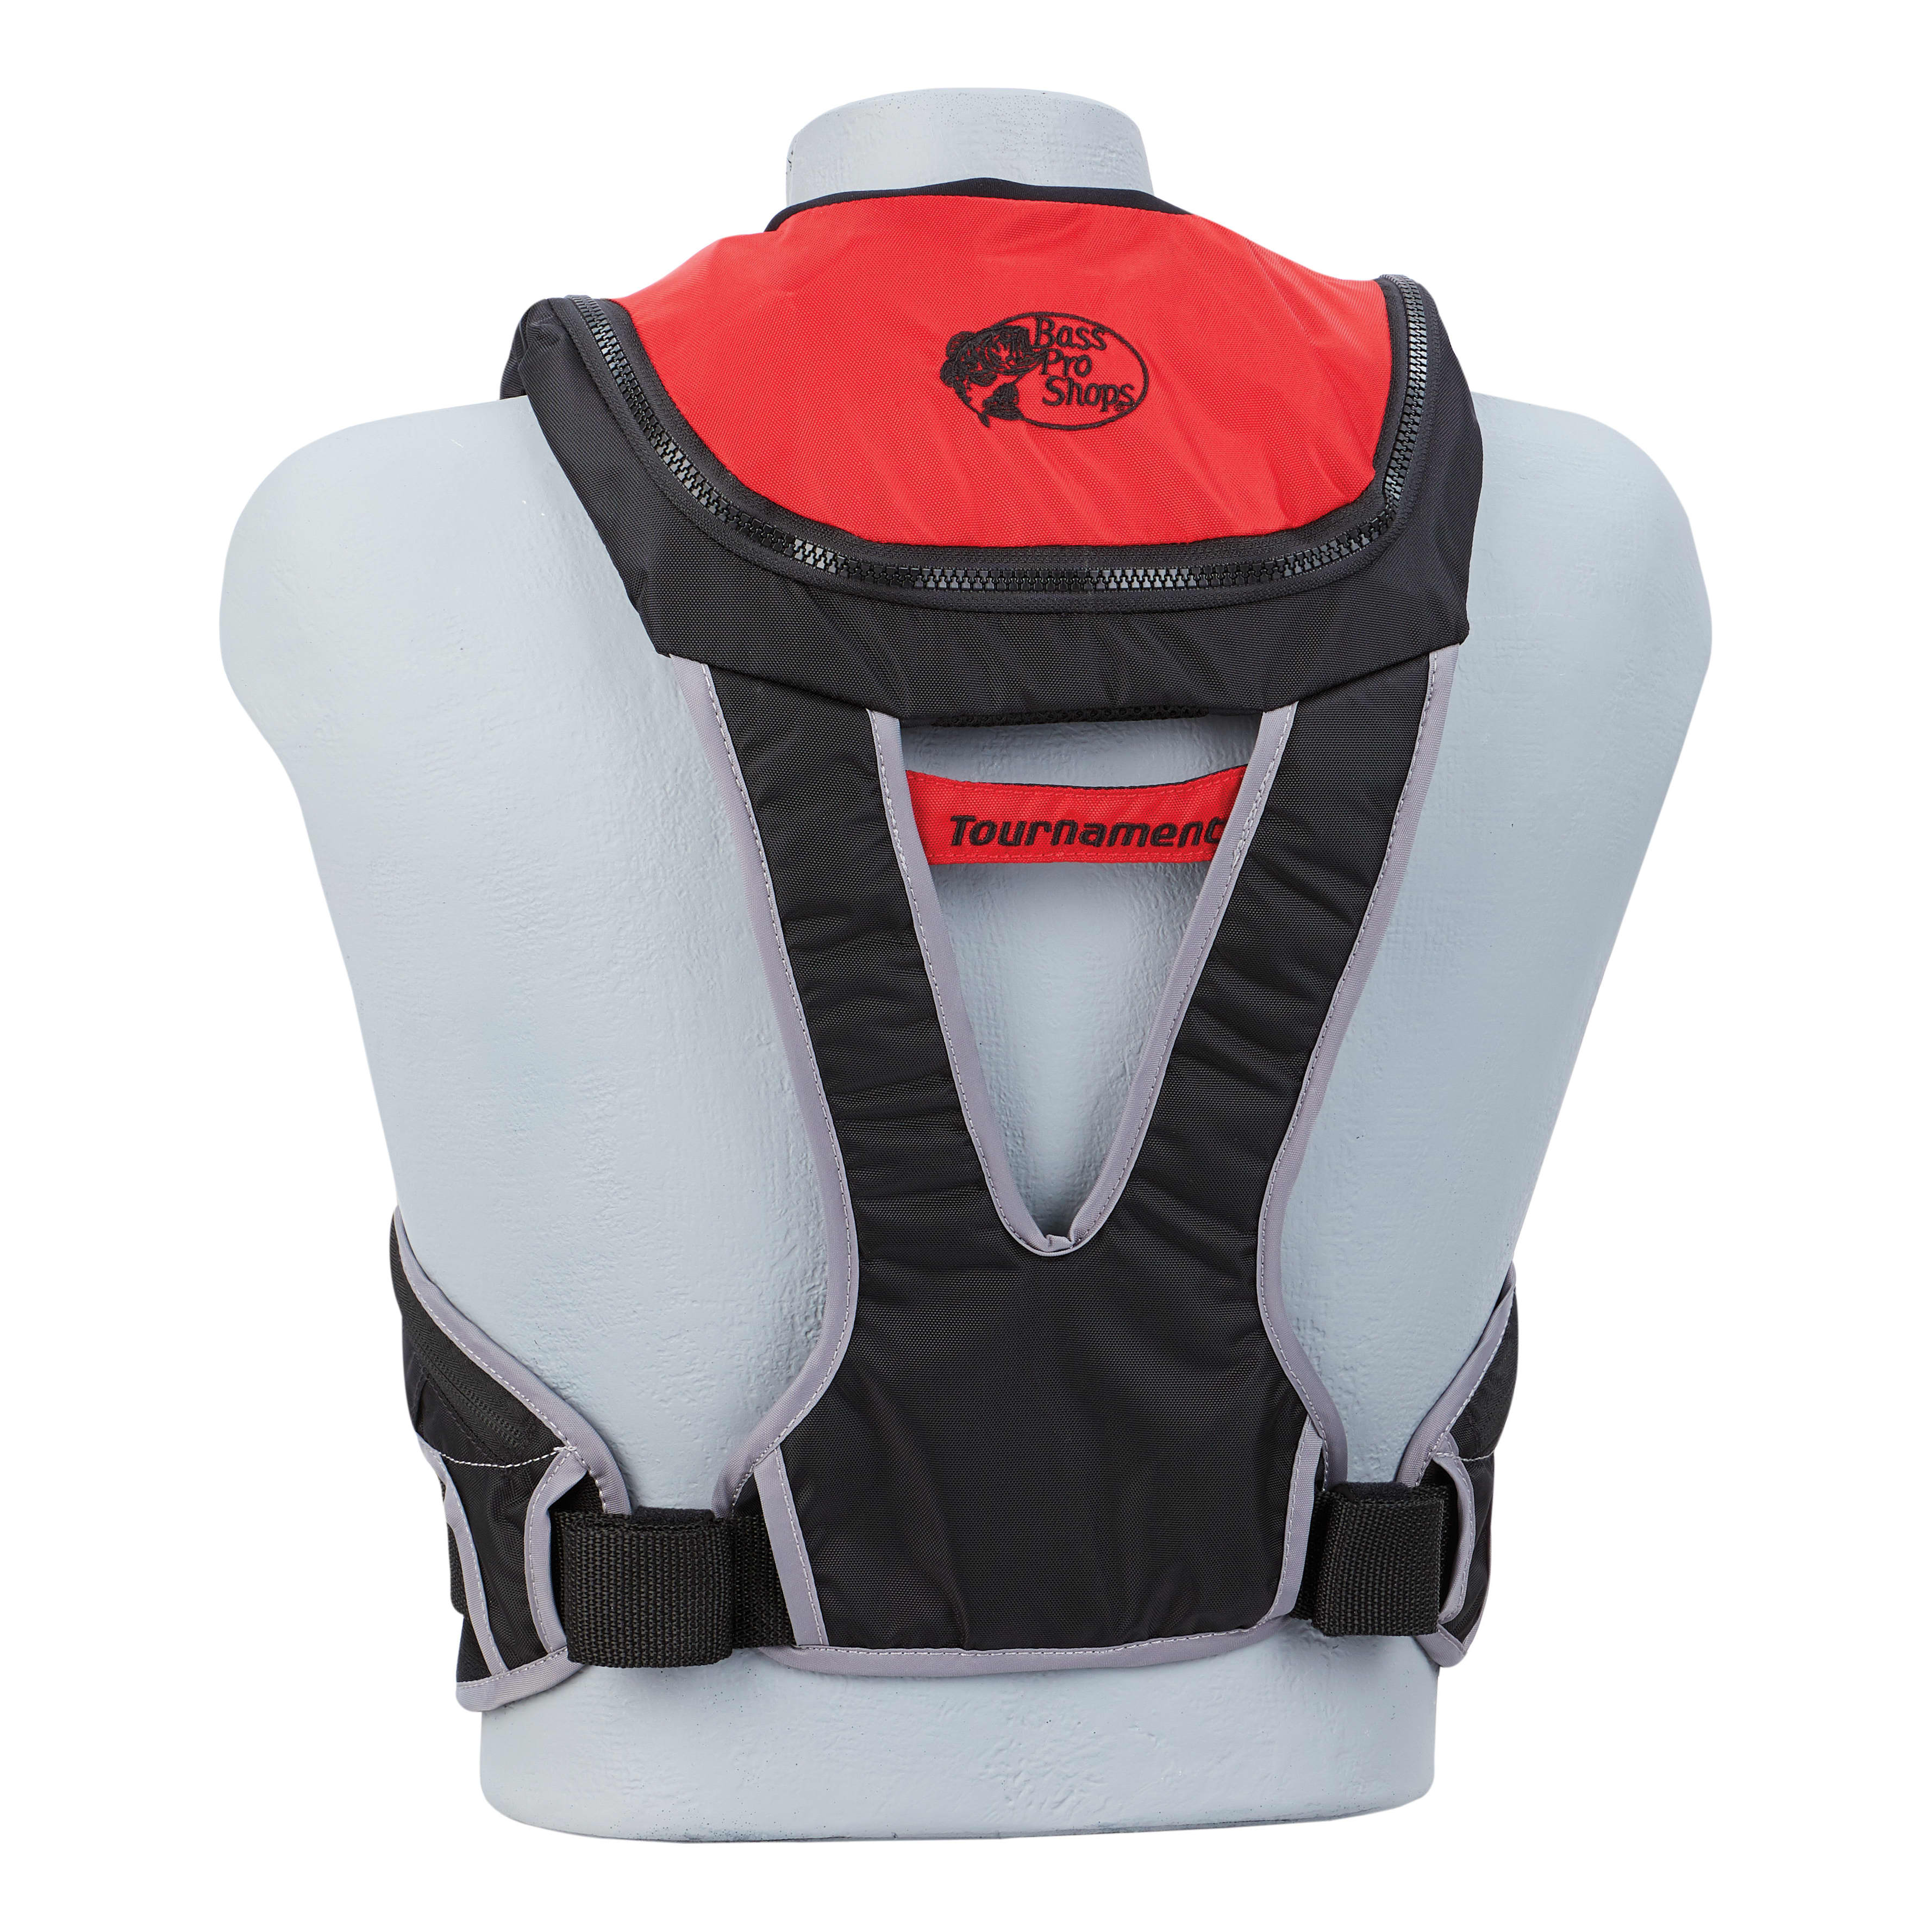 Bass Pro Shops® A/M-33 Deluxe All-Clear Inflatable Life Jacket - Red - Back View